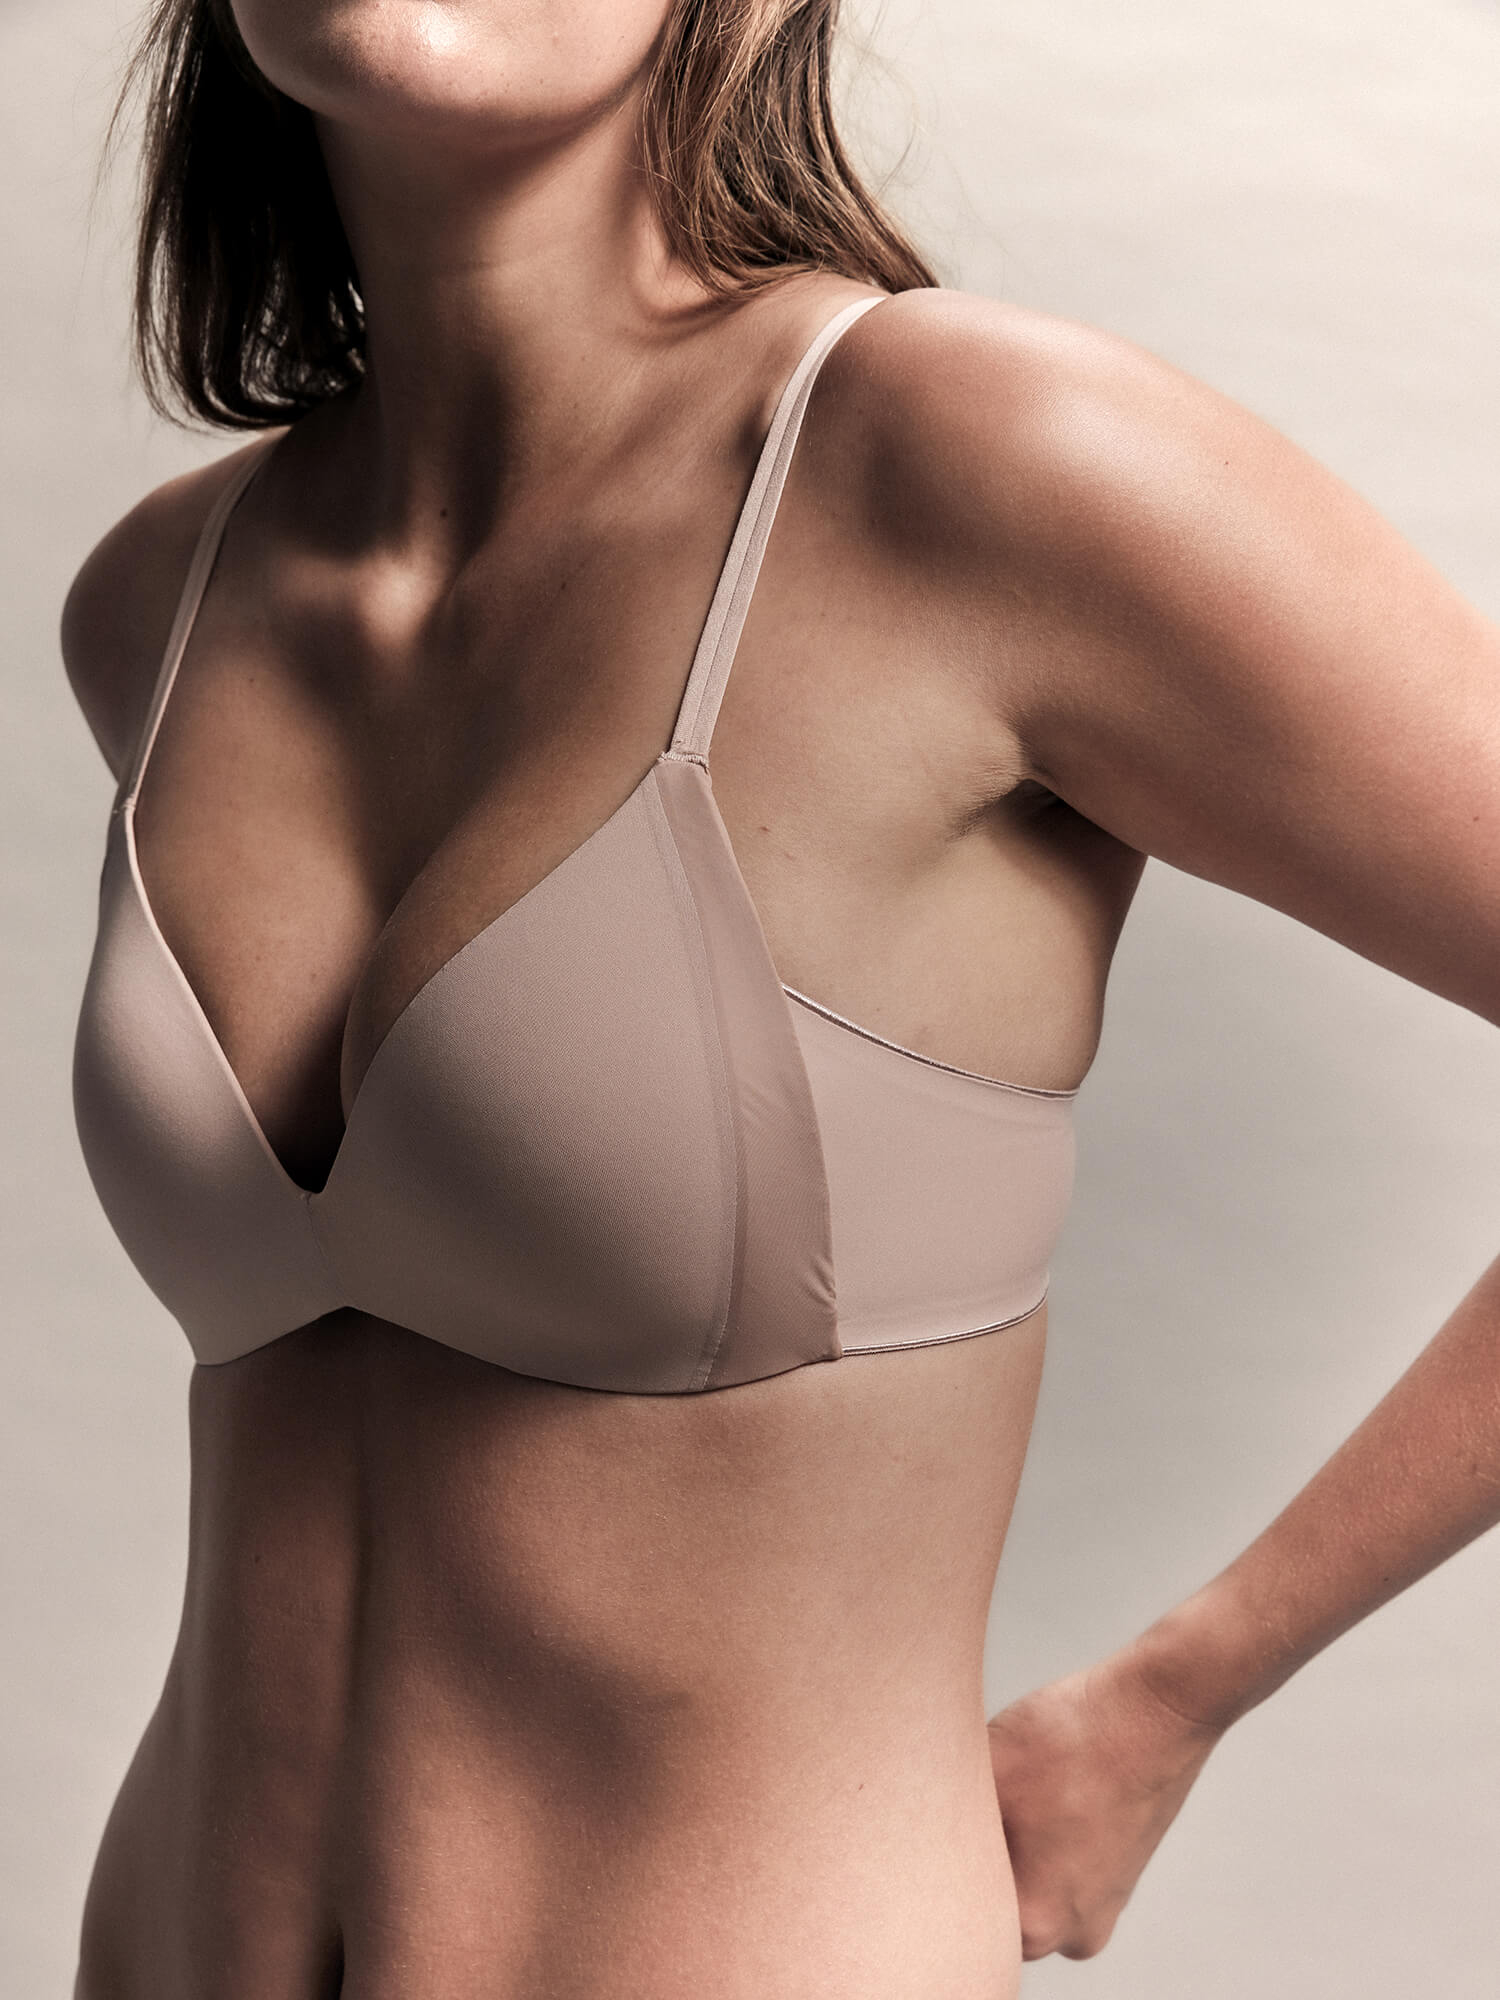 Bra Problem #3: Gaping or Curling Edges